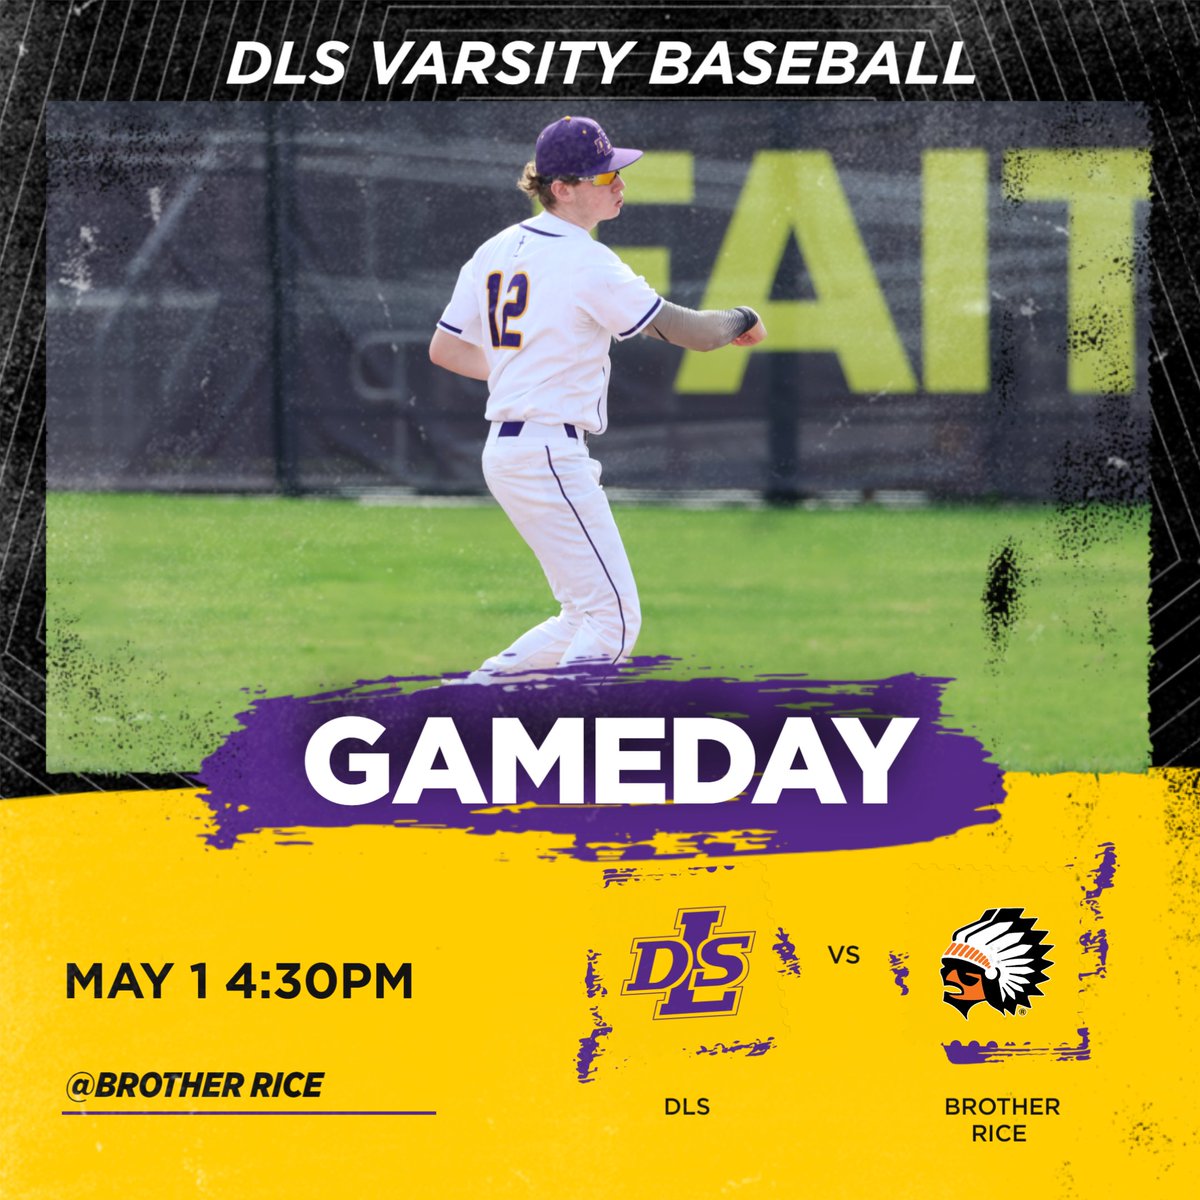 DLS Varsity Baseball heads to Brother Rice at 4:30PM today, May 1. Let’s go, Pilots! 

#PilotPride @Pilots_Baseball @CHSL1926